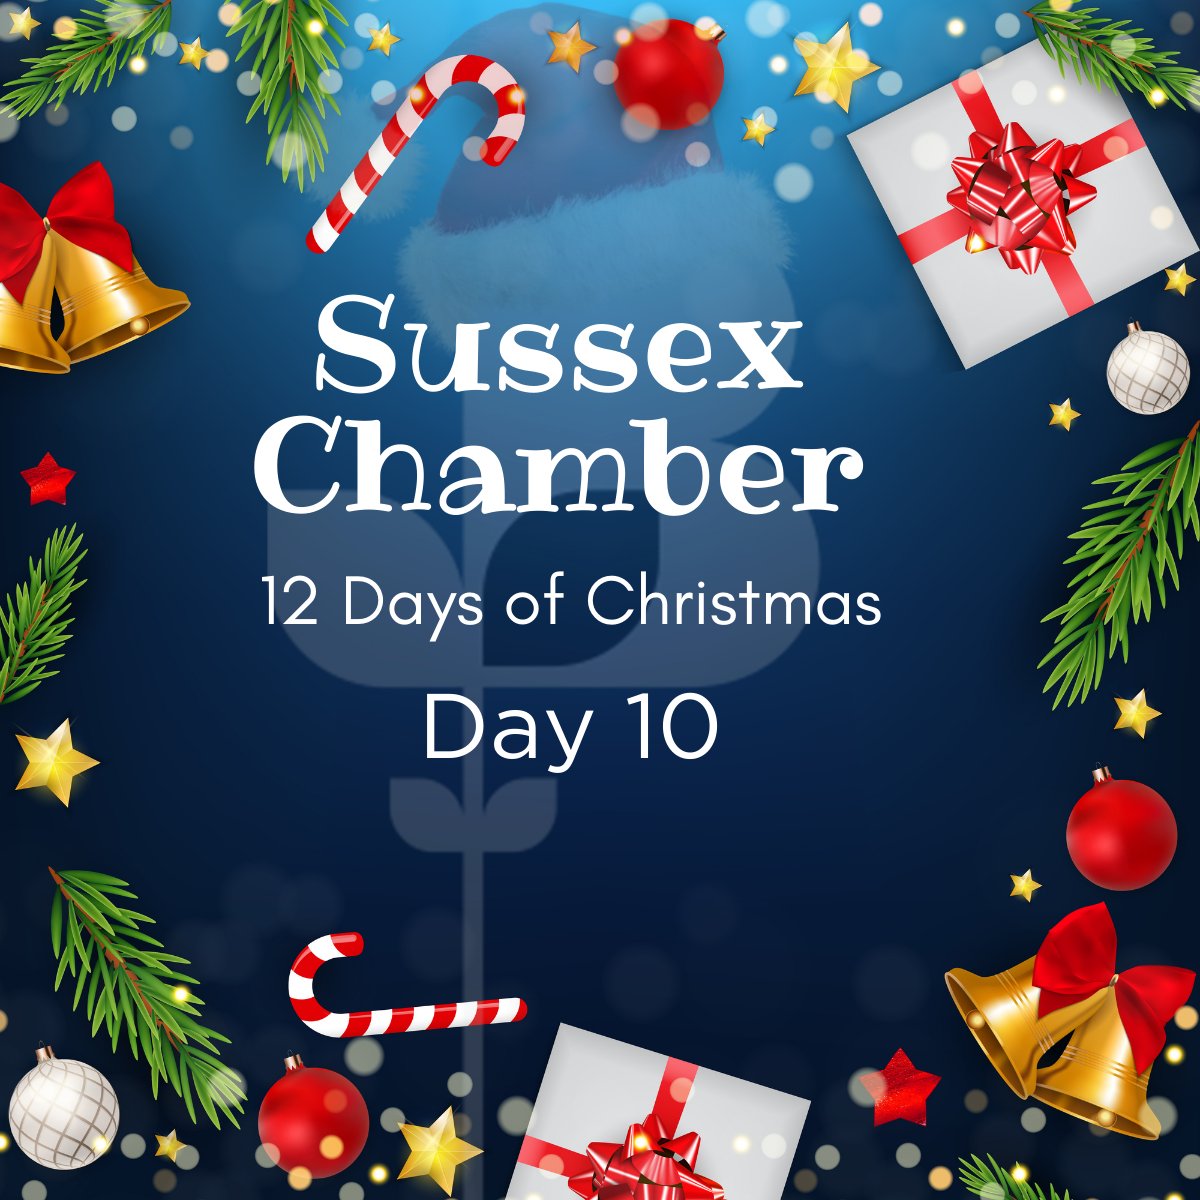 We're flying through December, Day 10 is here! Today's challenge: Take a selfie with Father Christmas View the full list of prizes here: sussexchamberofcommerce.co.uk/storage/resour… View the terms and conditions here: sussexchamberofcommerce.co.uk/storage/resour… #12daysofchristmas